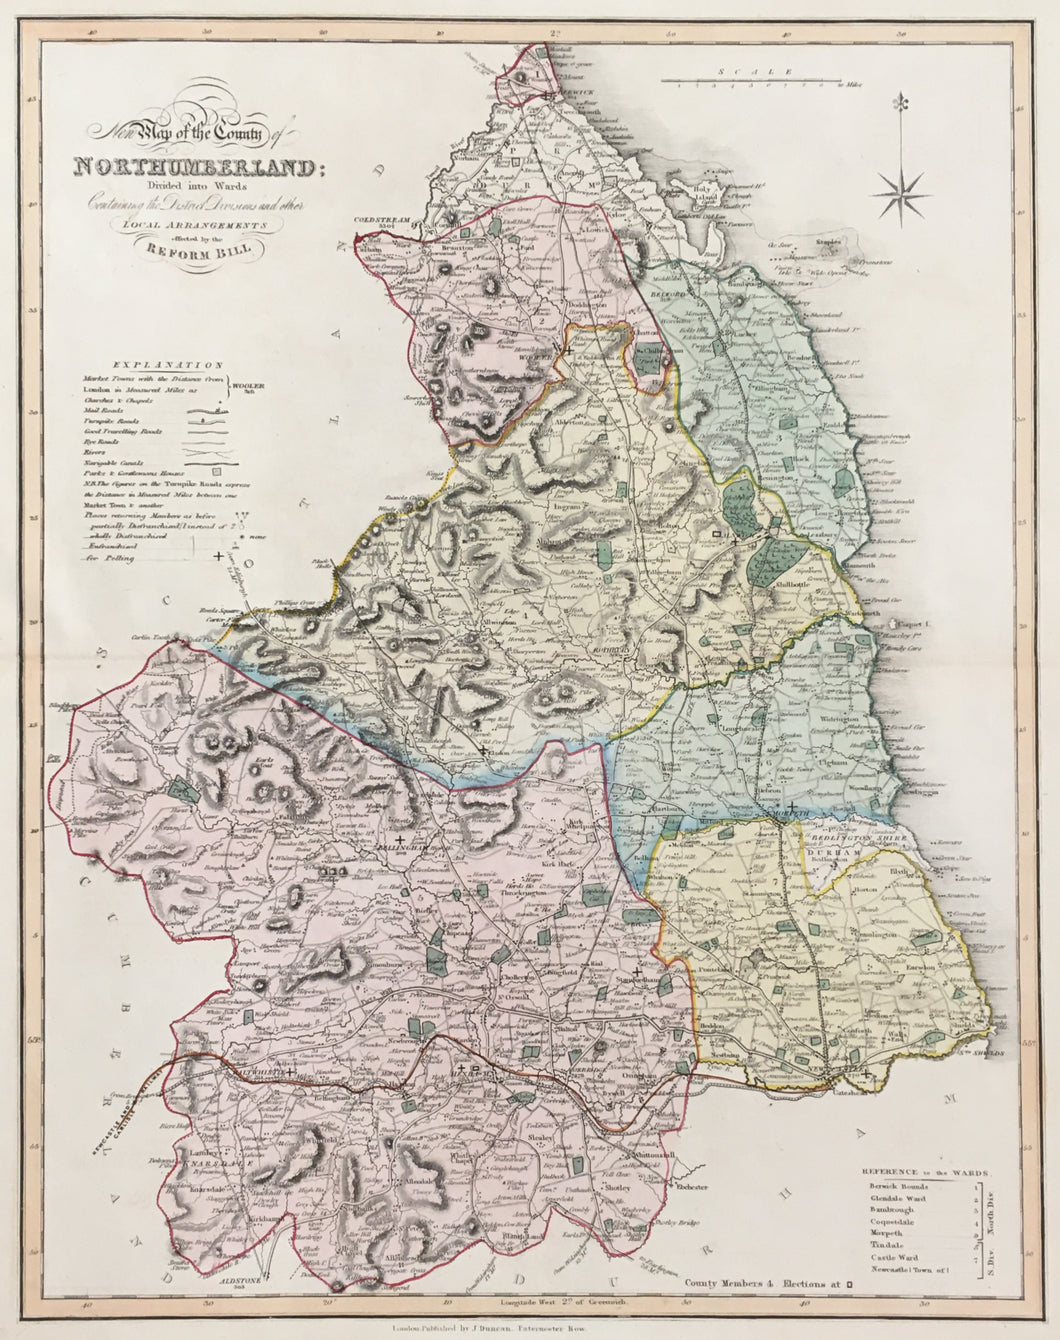 Ebden, William “New Map of the County of Northumberland.”